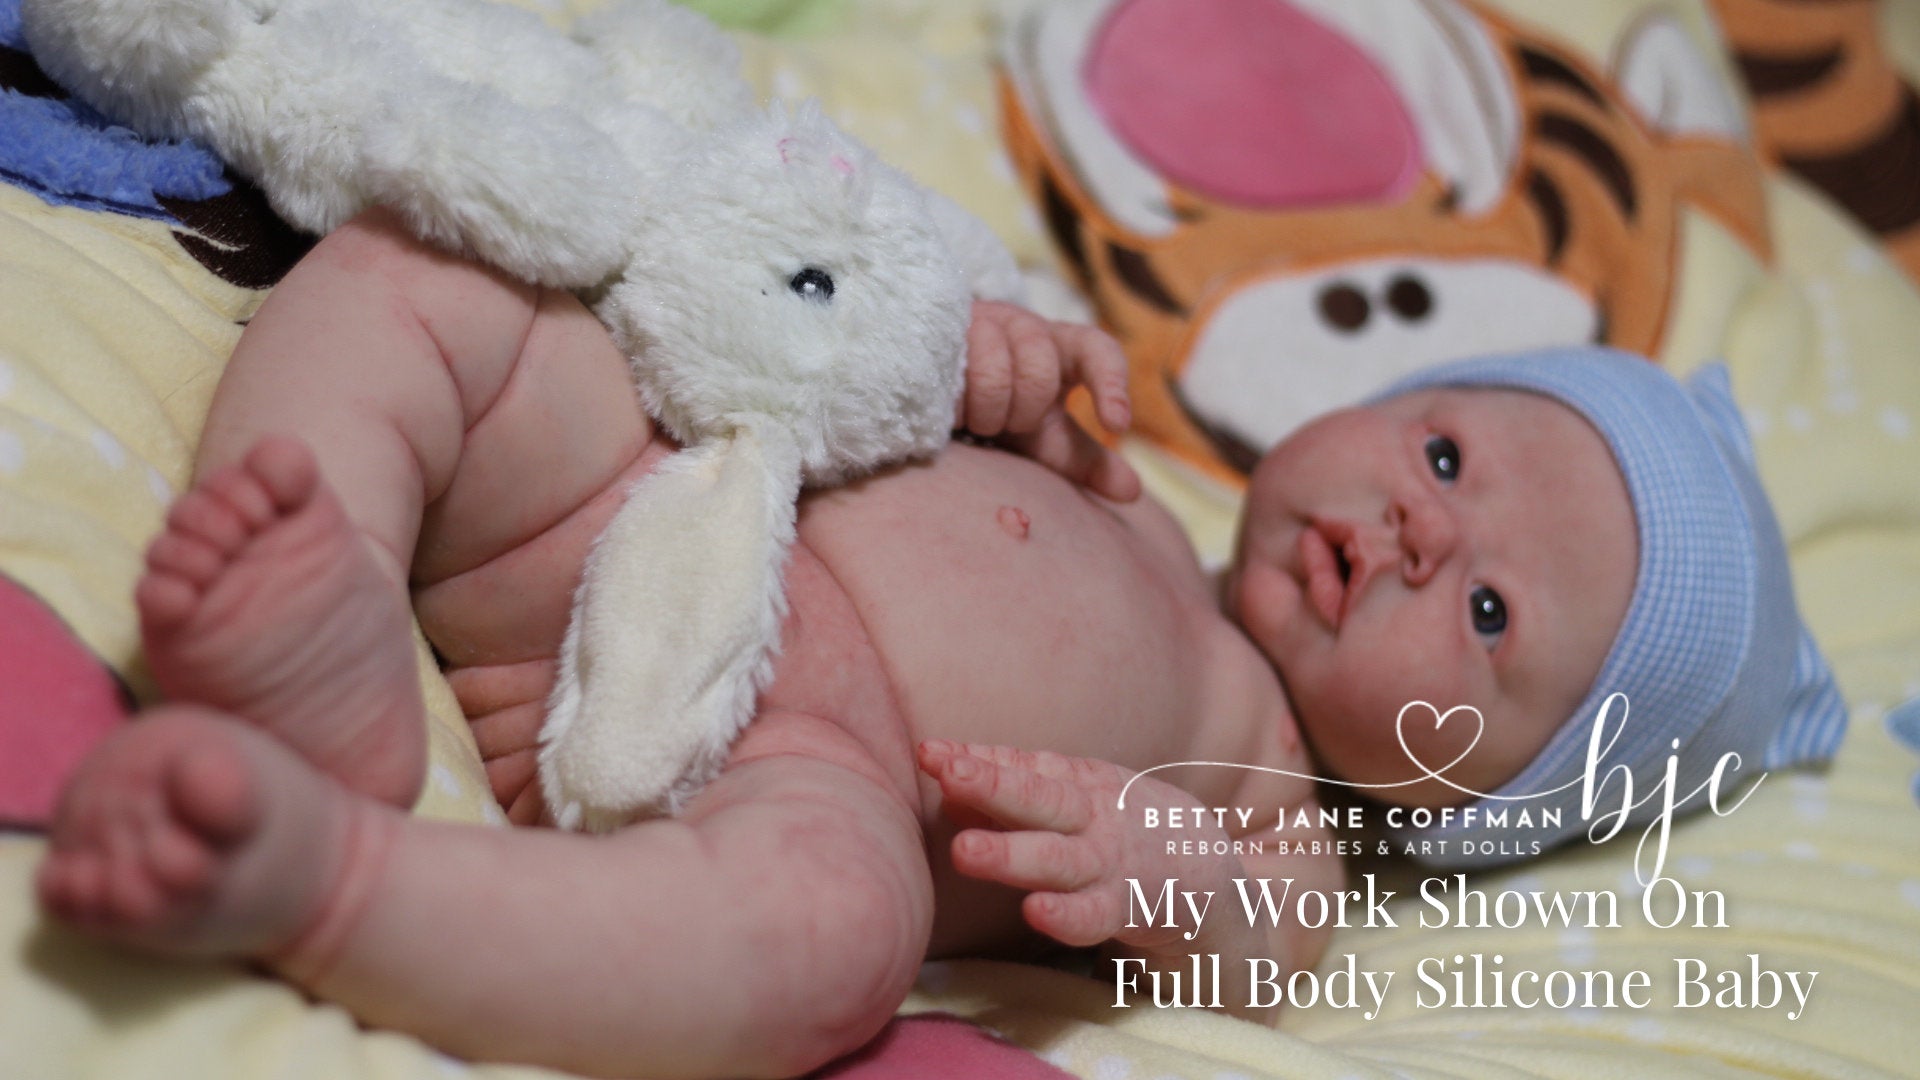 Full Body Silicone Baby Pip by Izzy Zhao (15.5 inches 5lbs 6 oz) TEMPORARILY OUT Of STOCK *Listing Images include pictures of my own work.